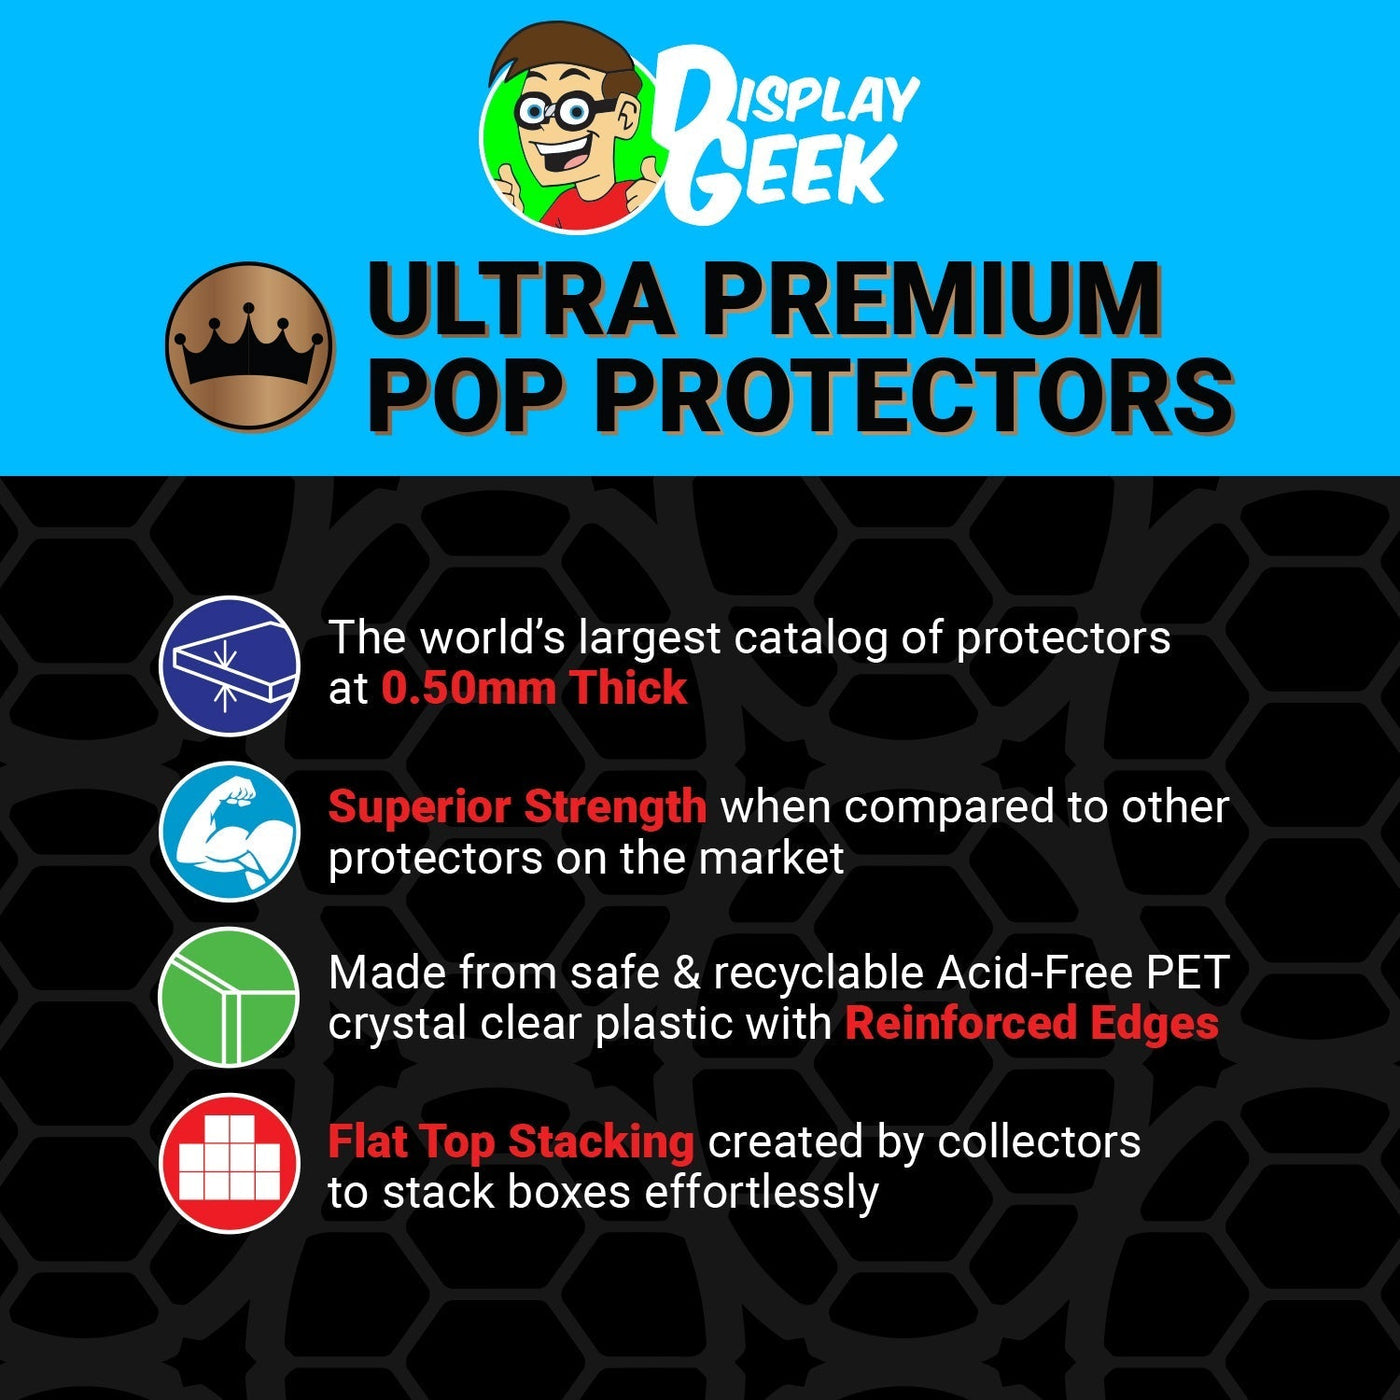 Pop Protector for 4 Pack Ariel, Jasmine, Rapunzel & Moana Glow Funko Pop on The Protector Guide App by Display Geek